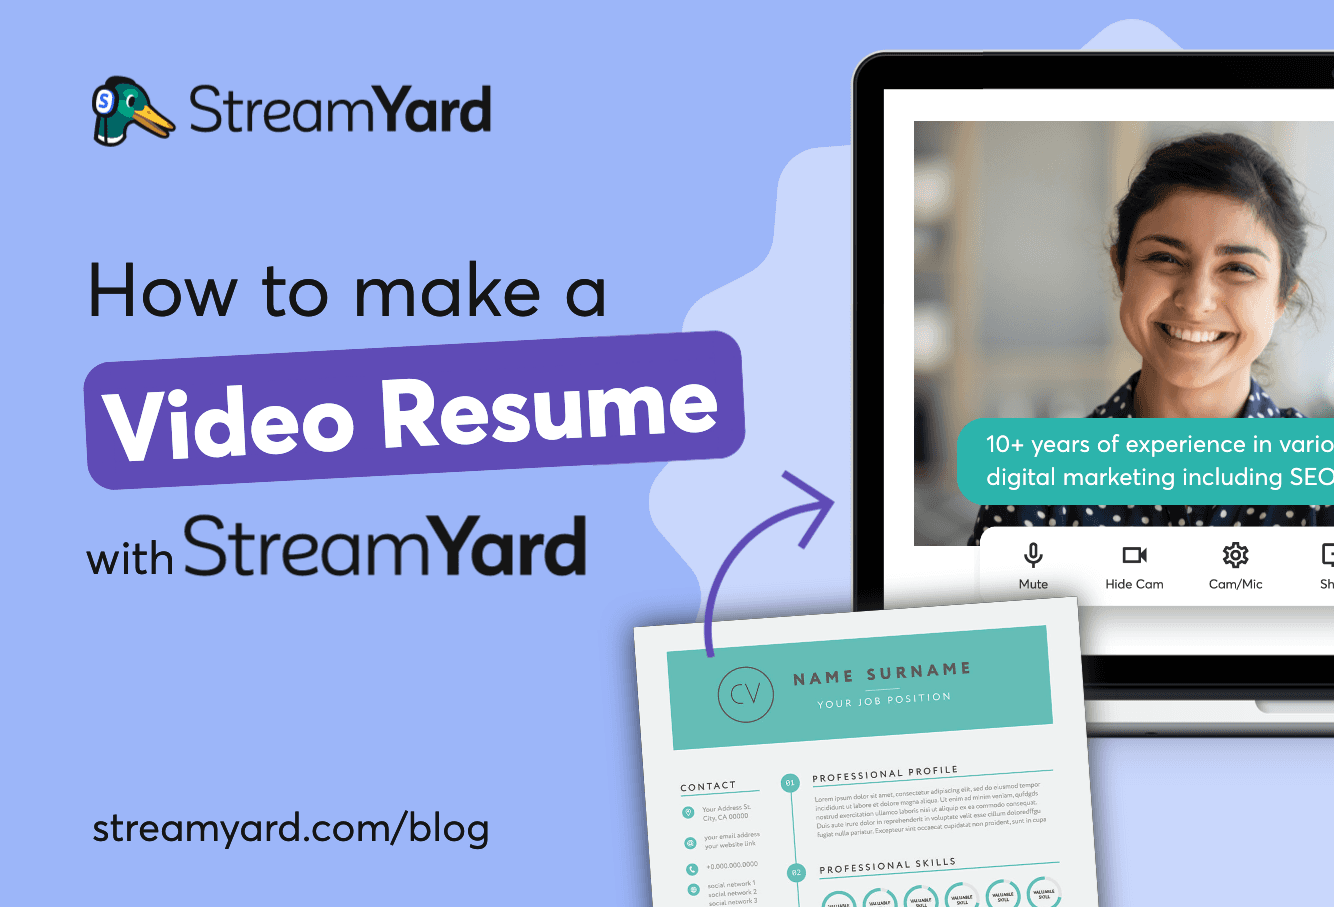 Learn how to make a video resume with StreamYard to help set yourself apart from other applicants with this step-by-step guide.